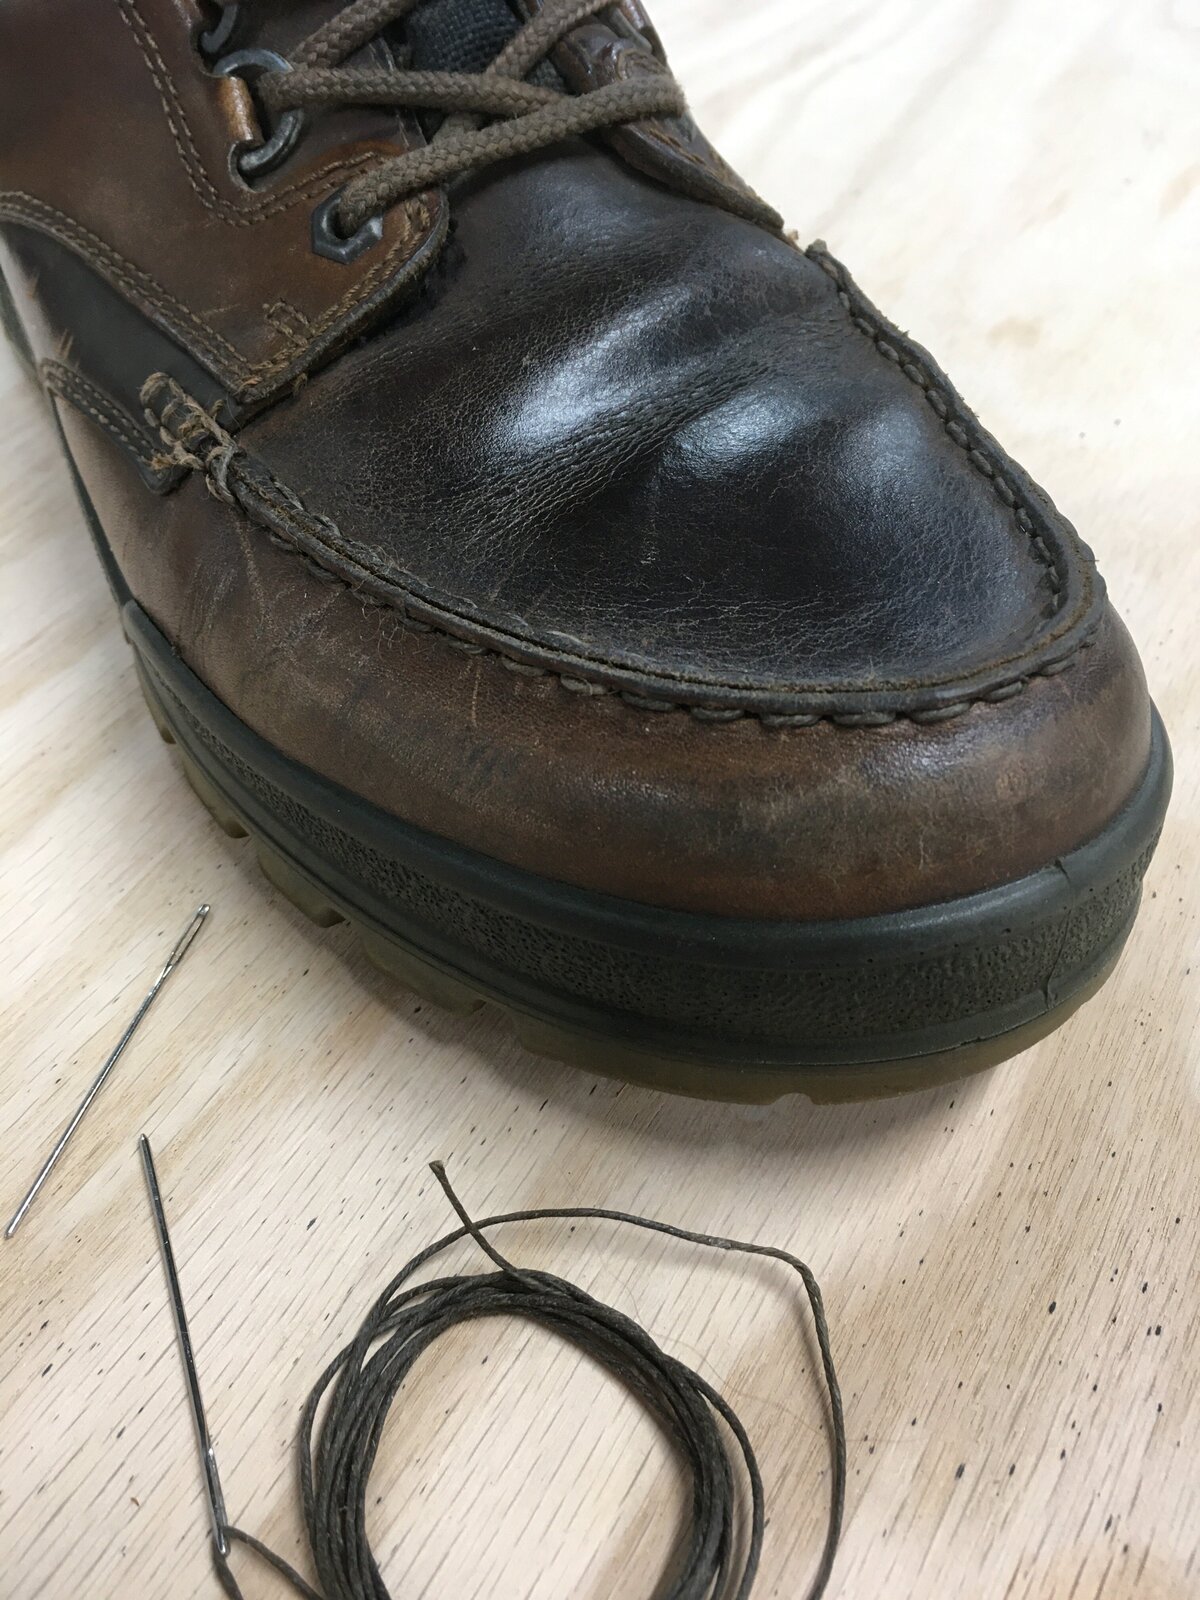 Moc Toe Boot Stitching After